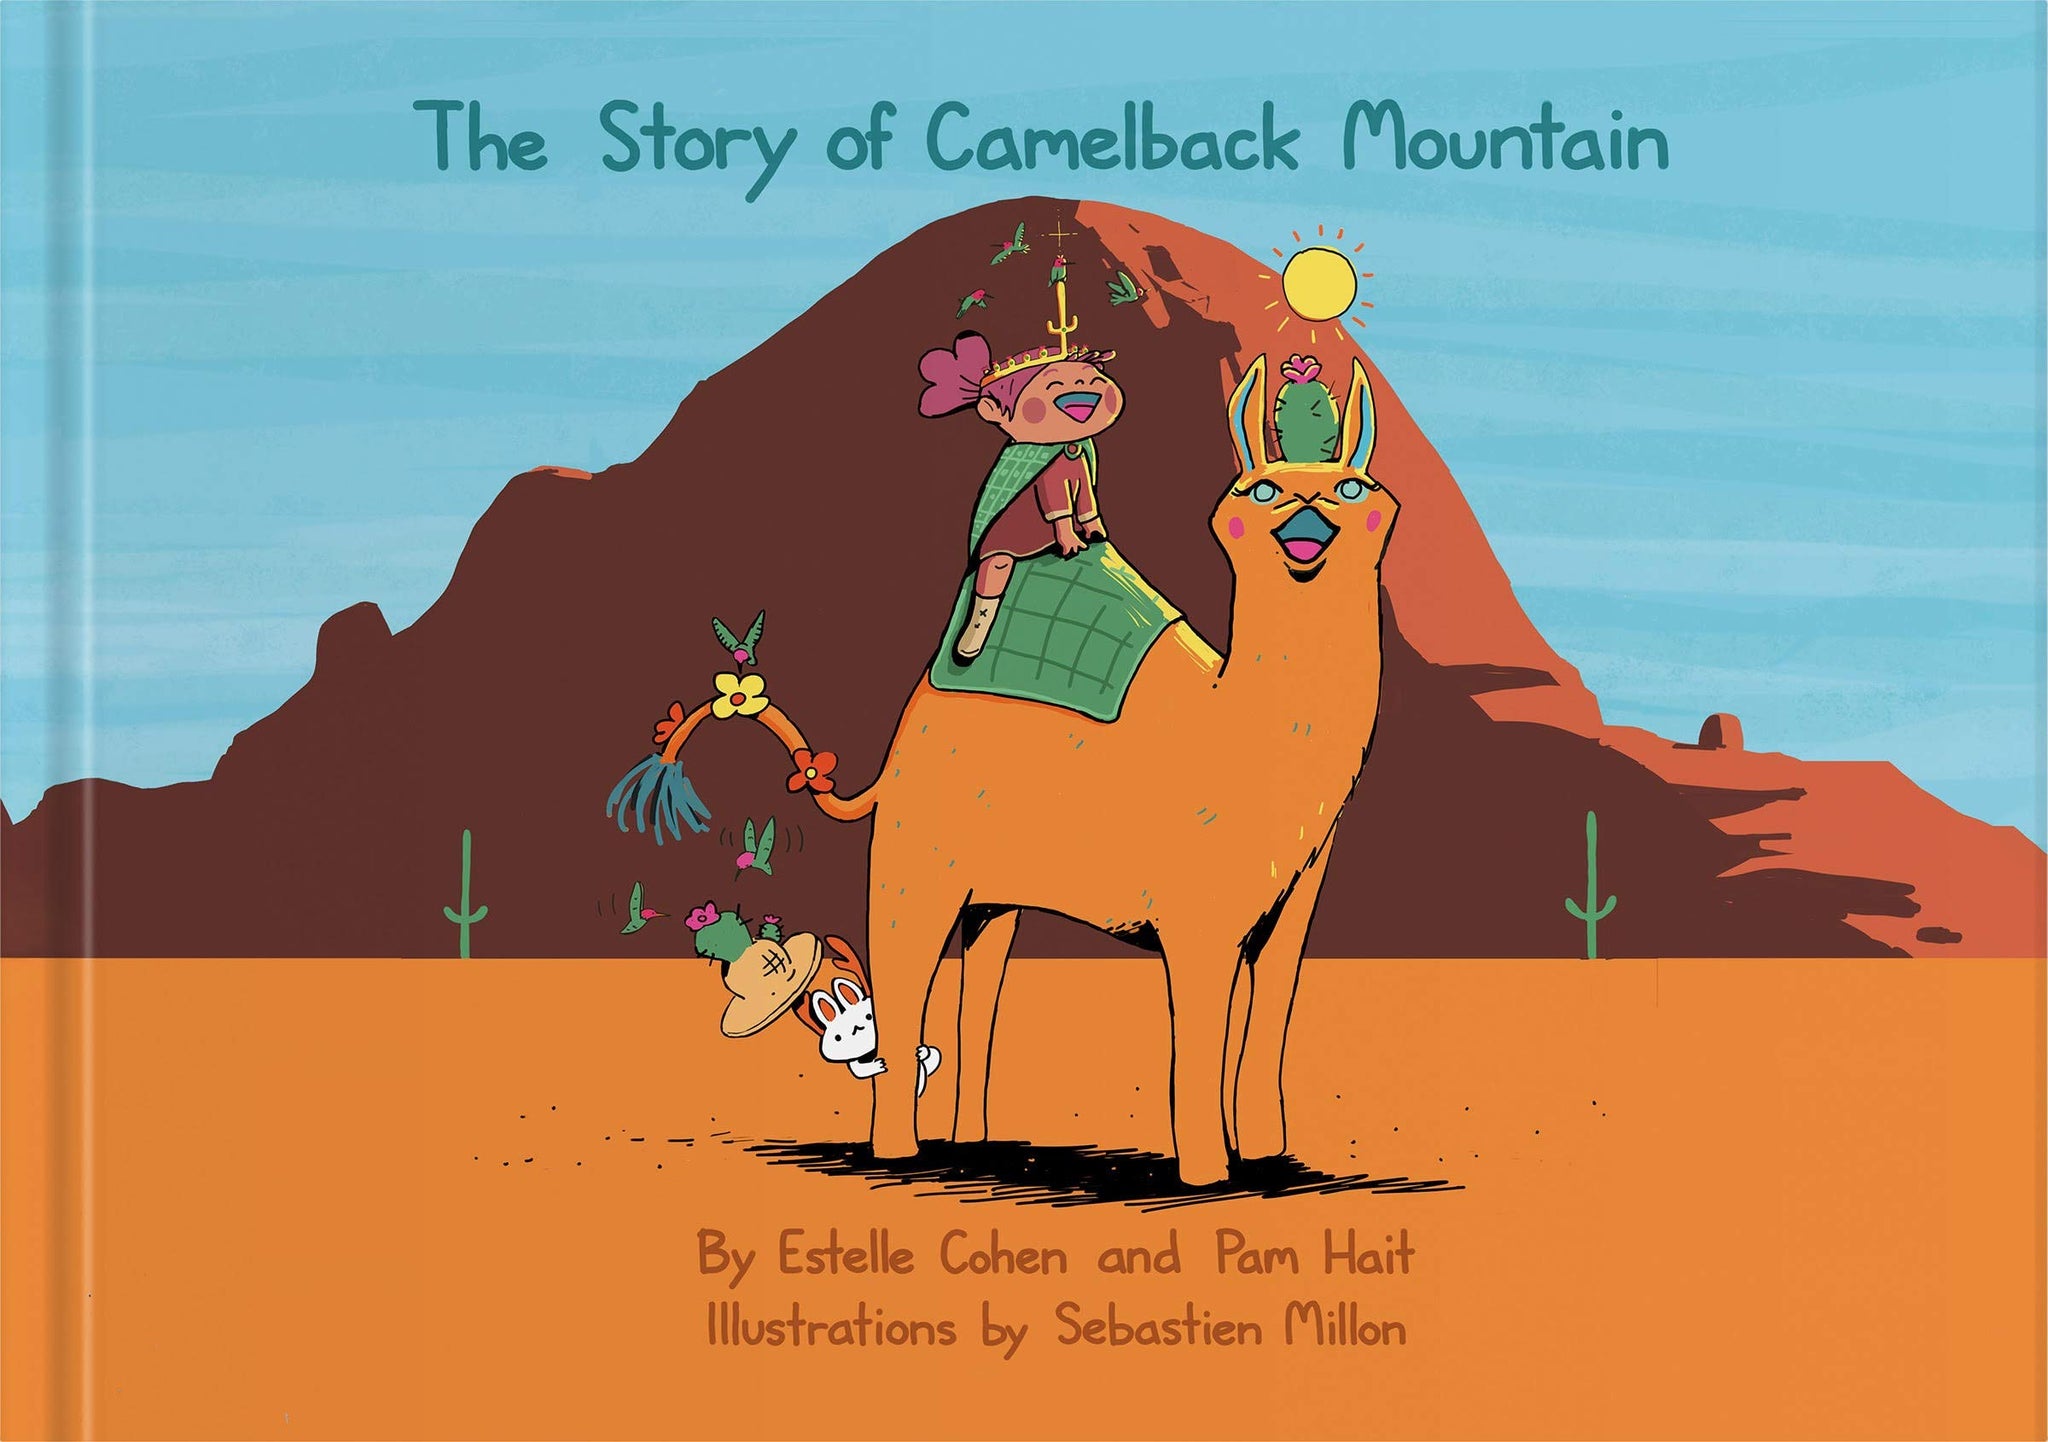 The Story of Camelback Mountain